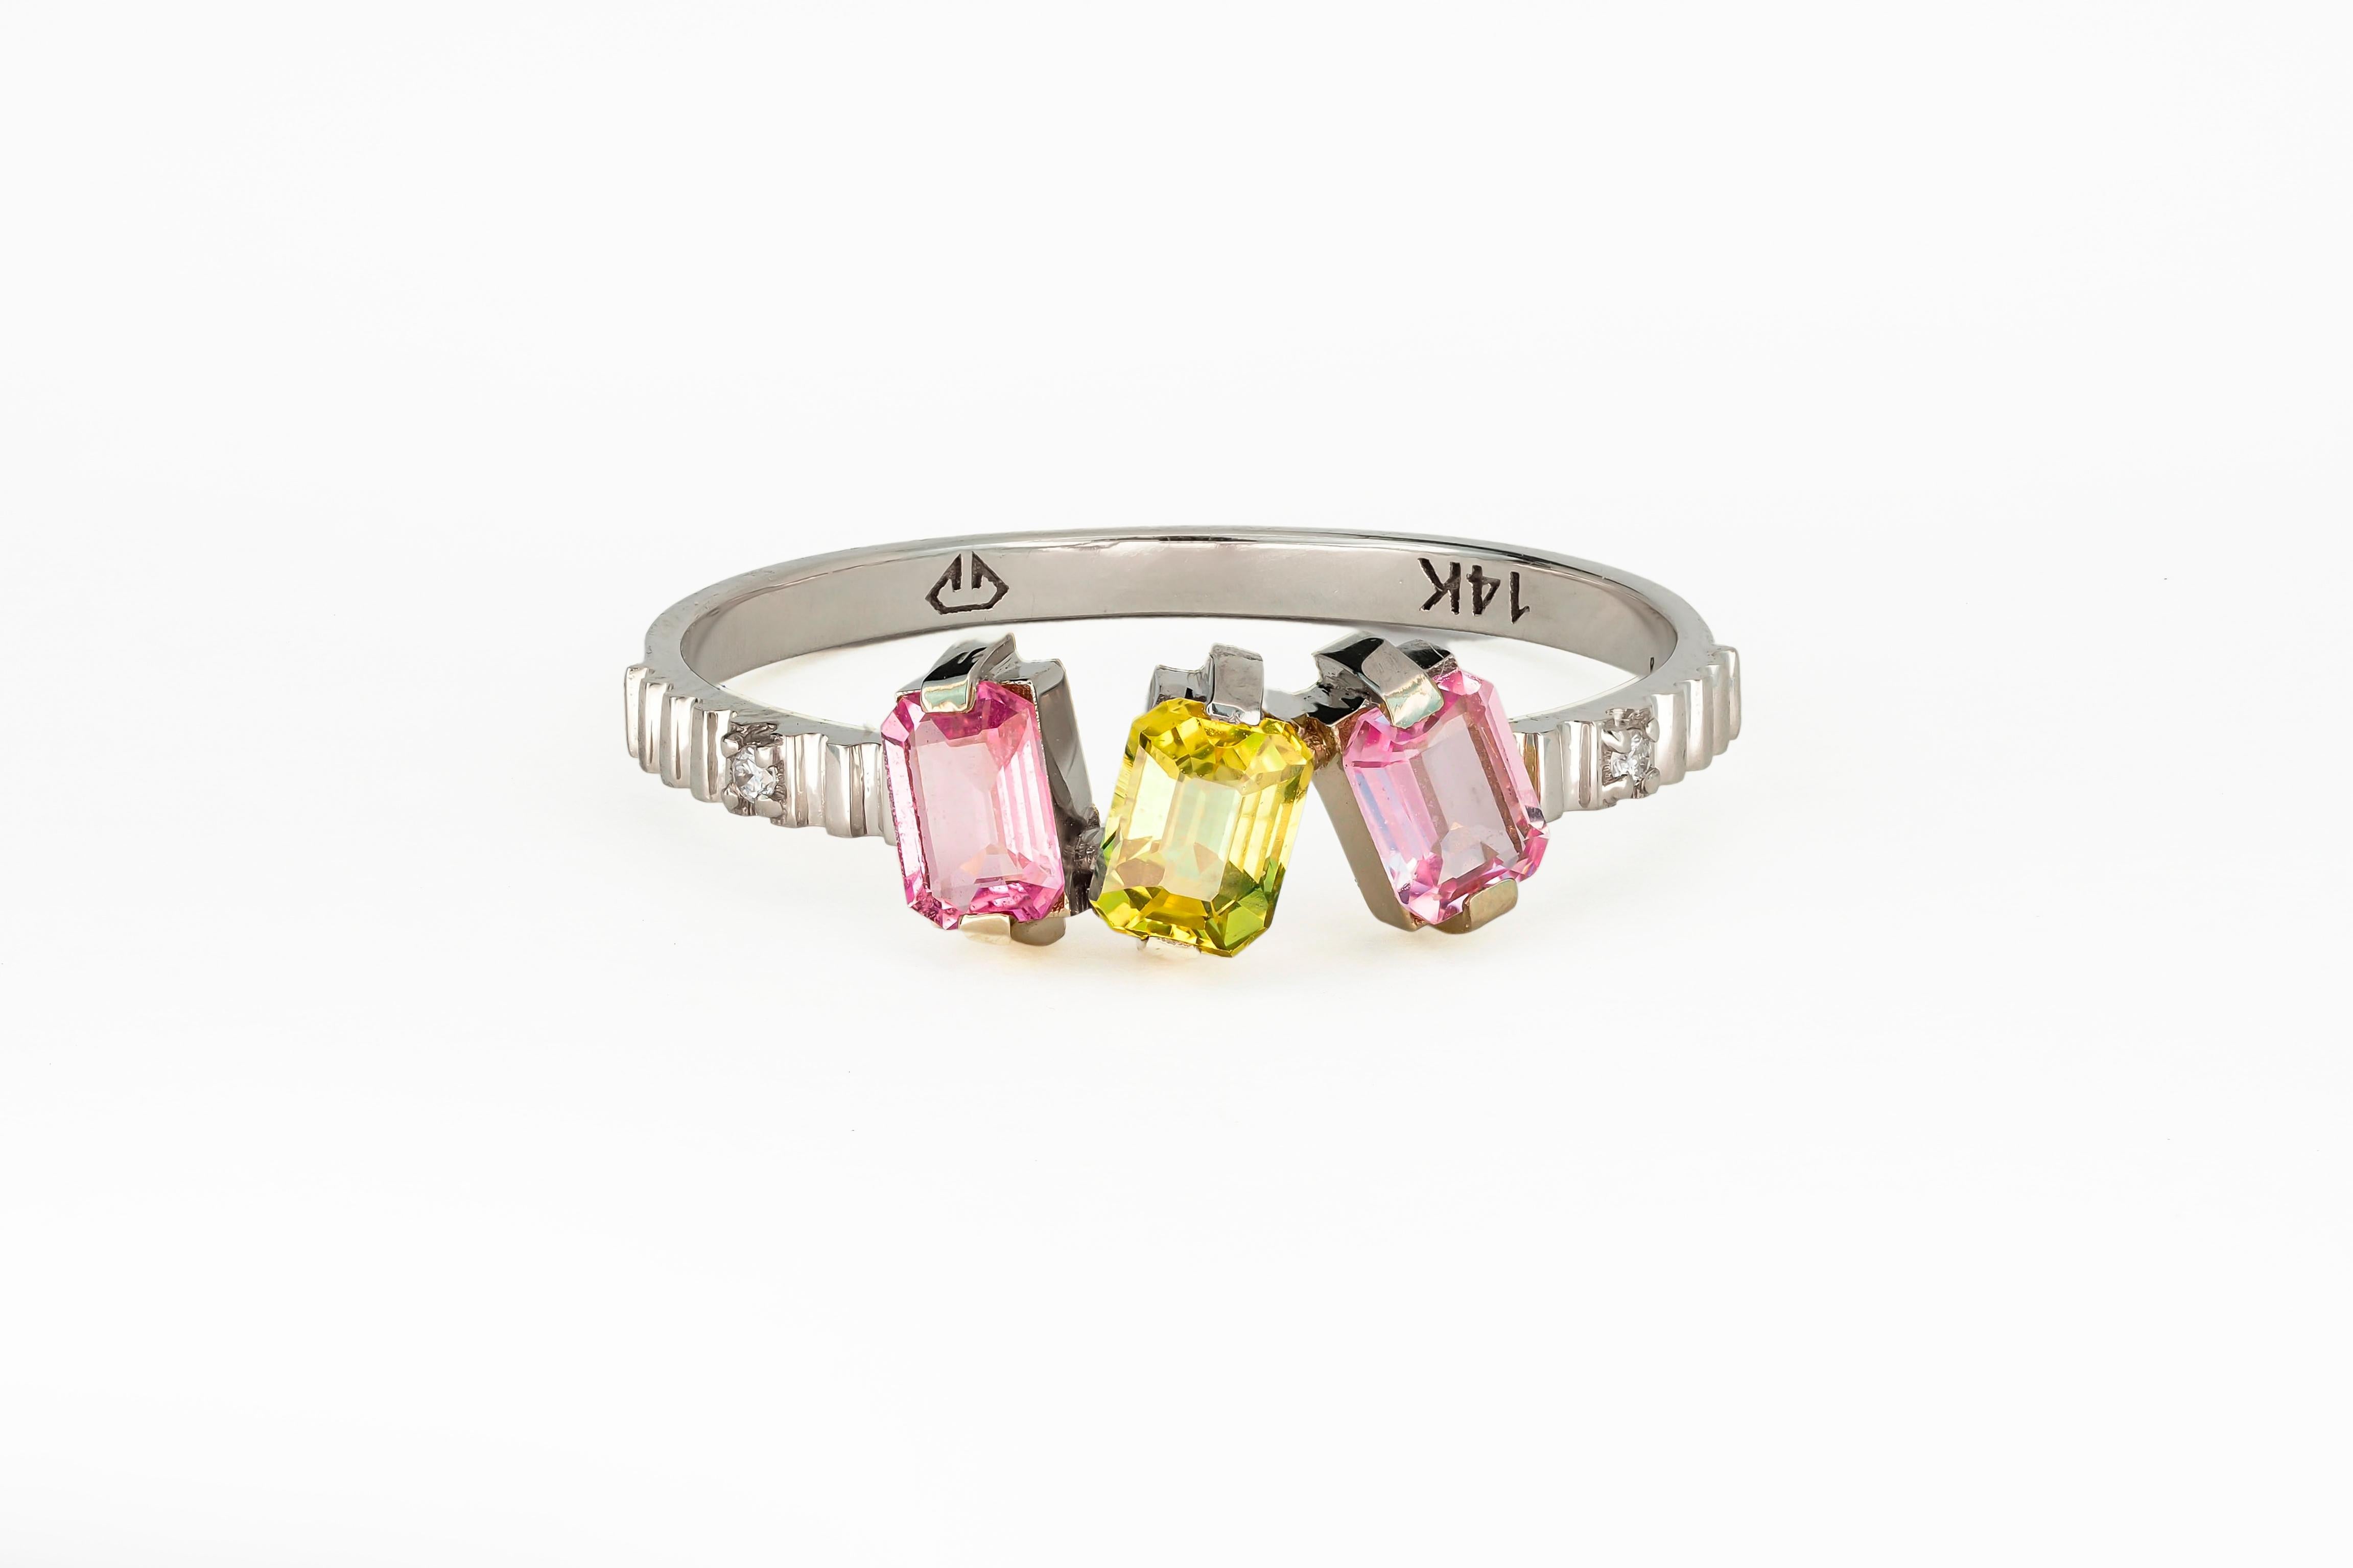 Pink and yellow sapphire gold ring. 
Baguette sapphires and diamonds ring.

Weight: 1.65 g. depends from size.
Metal: 14 karat gold

Central stone: Sapphires - 3 pieces
Cut: Baguette 
Weight: aprx 0.45 ct (3x0.15ct)
Color: pink  and yellow
Clarity: